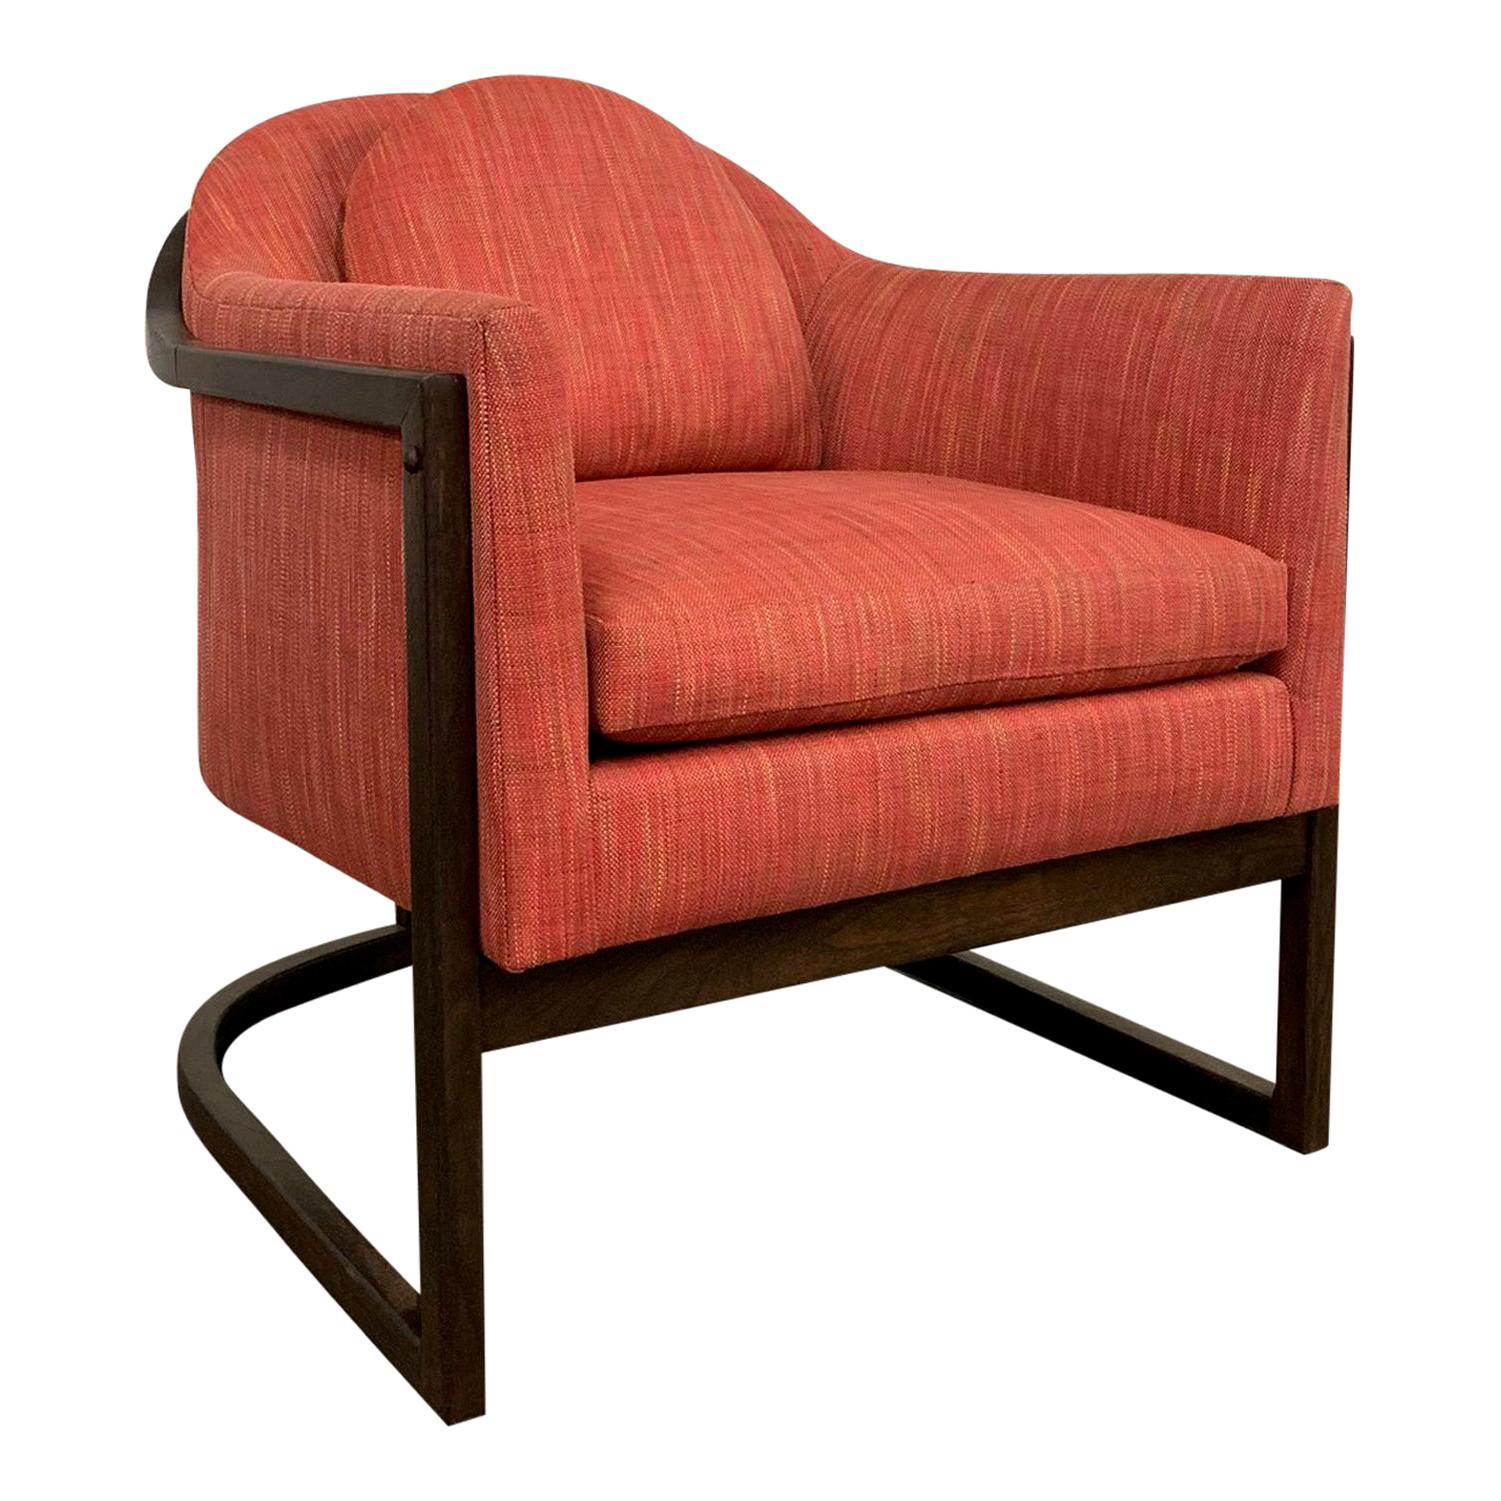 Mid-Century Modern Upholstered Barrel Club Chair Attributed to Harvey Probber For Sale